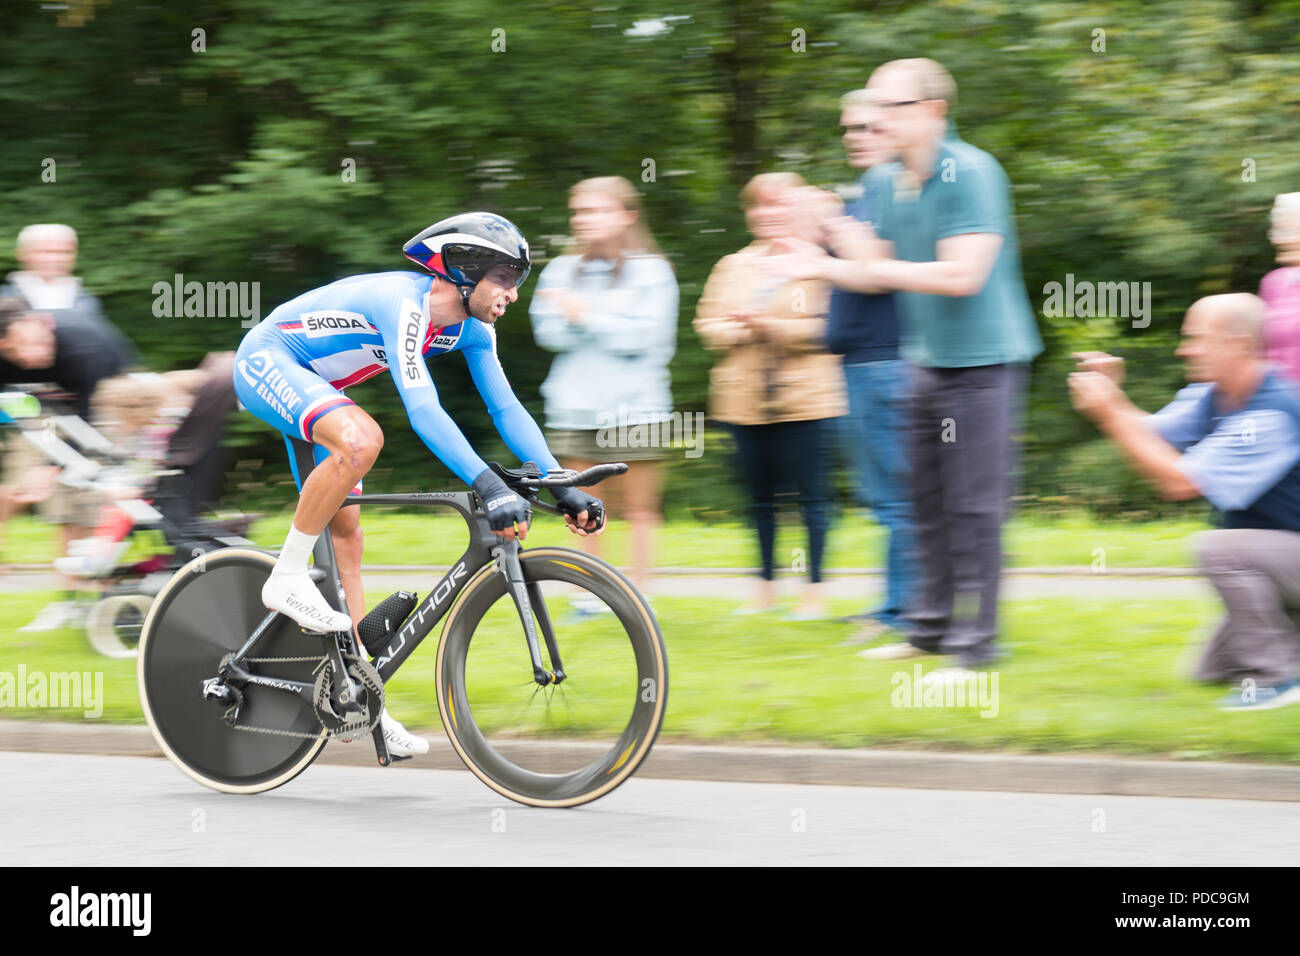 Strathblane, Glasgow, Scotland, UK - 8 August 2018: European Championships mens cycling time trial - Jan Barta (CZE) being cheered through the village of Strathblane during the mens cycling time trial event at the European Championships 2018 Credit: Kay Roxby/Alamy Live News Stock Photo